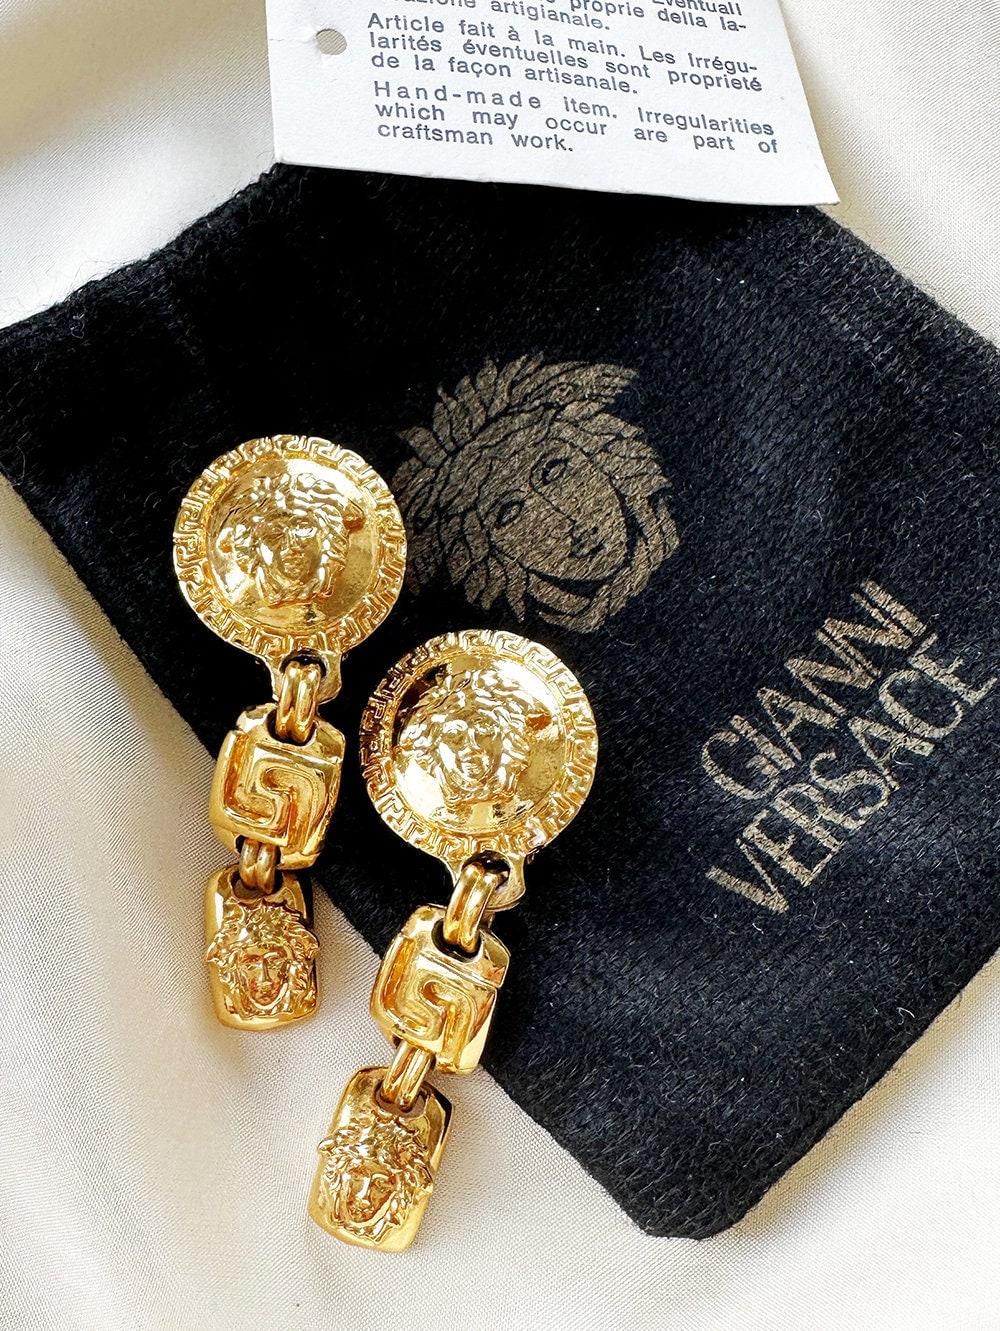 Owned & Worn by Prince - Gianni Versace Medusa Gold Tone Watch